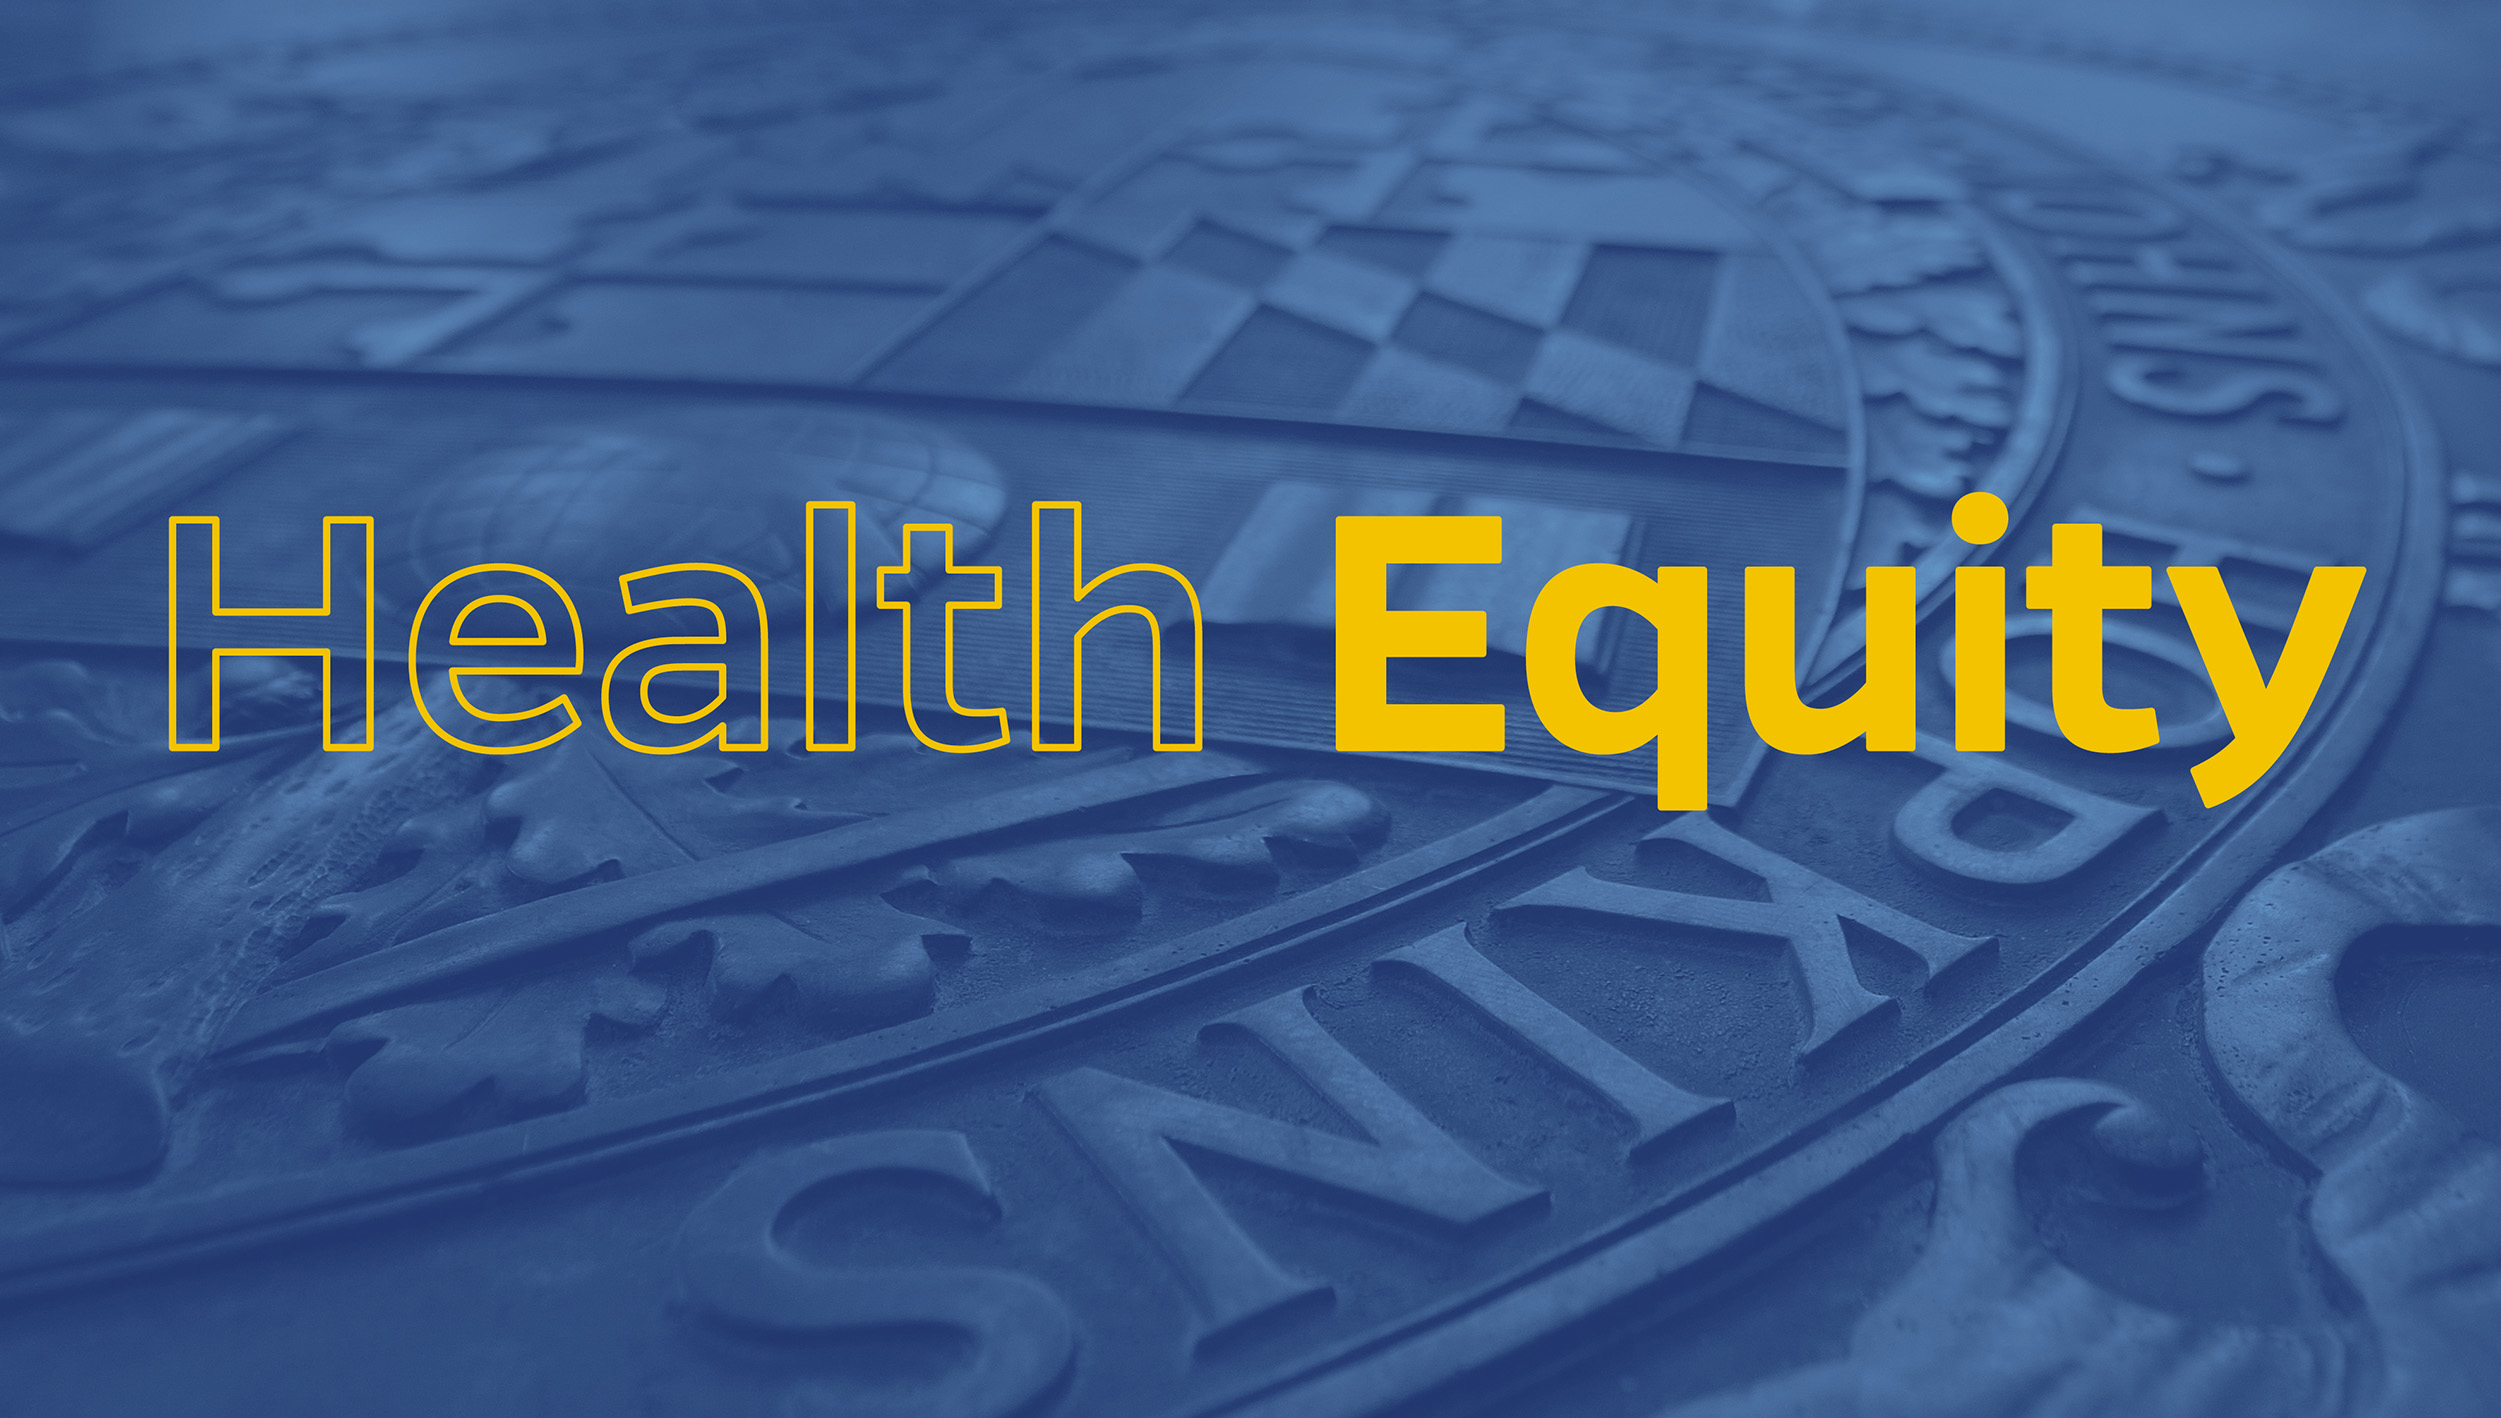 November Hopkins Health Equity Discussion